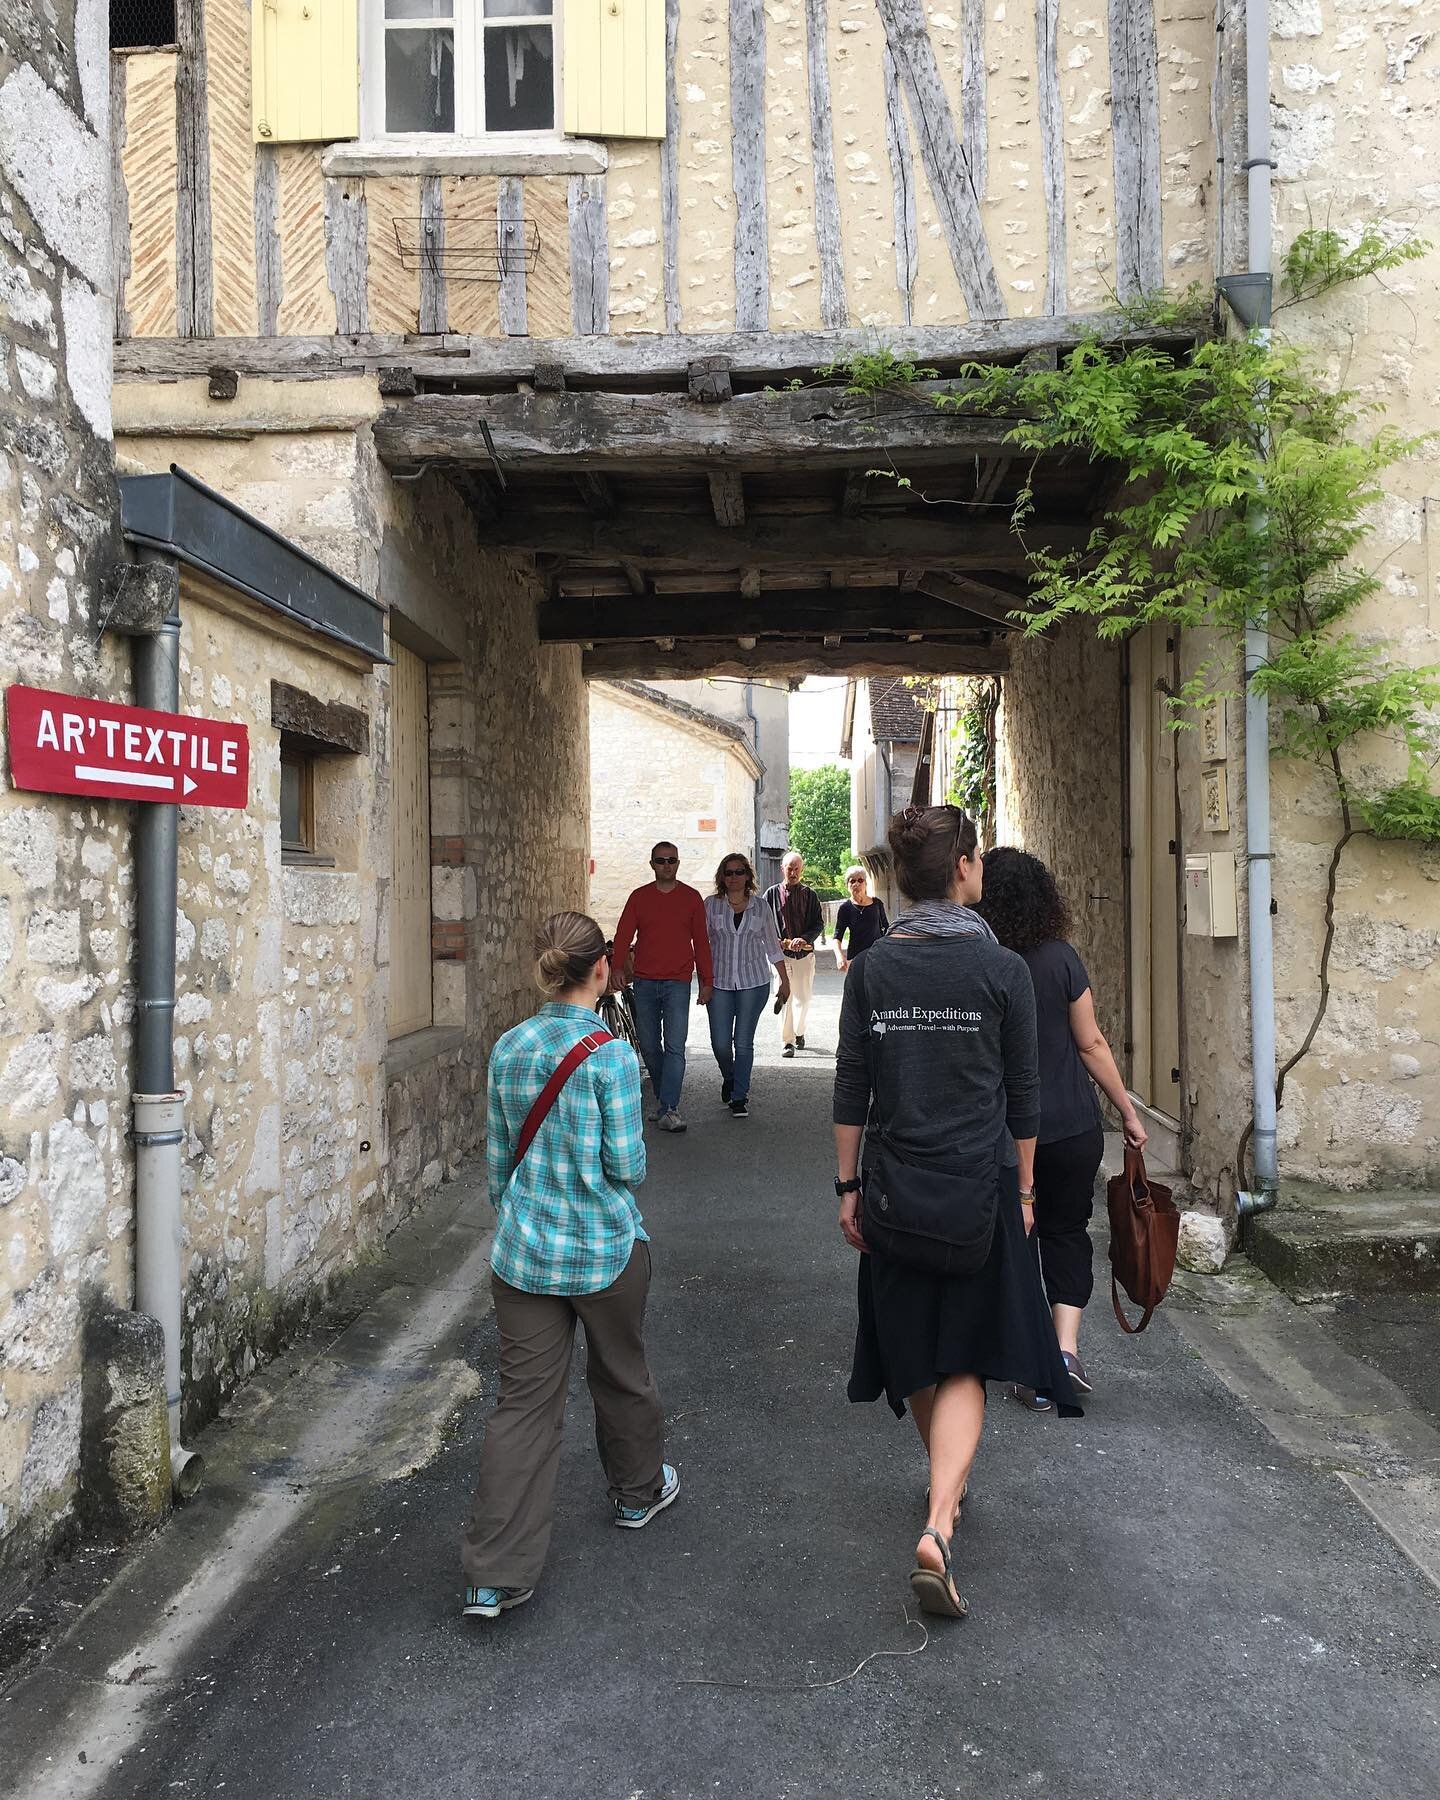 GET THEE TO FRANCE! | 🇫🇷 Provence, May 24-31 🇫🇷 **ONE double** and **ONE single** remain! We have a great group signed up, and we&rsquo;d love you to join us &mdash; come explore medieval French market towns like the one pictured here. REGISTER T